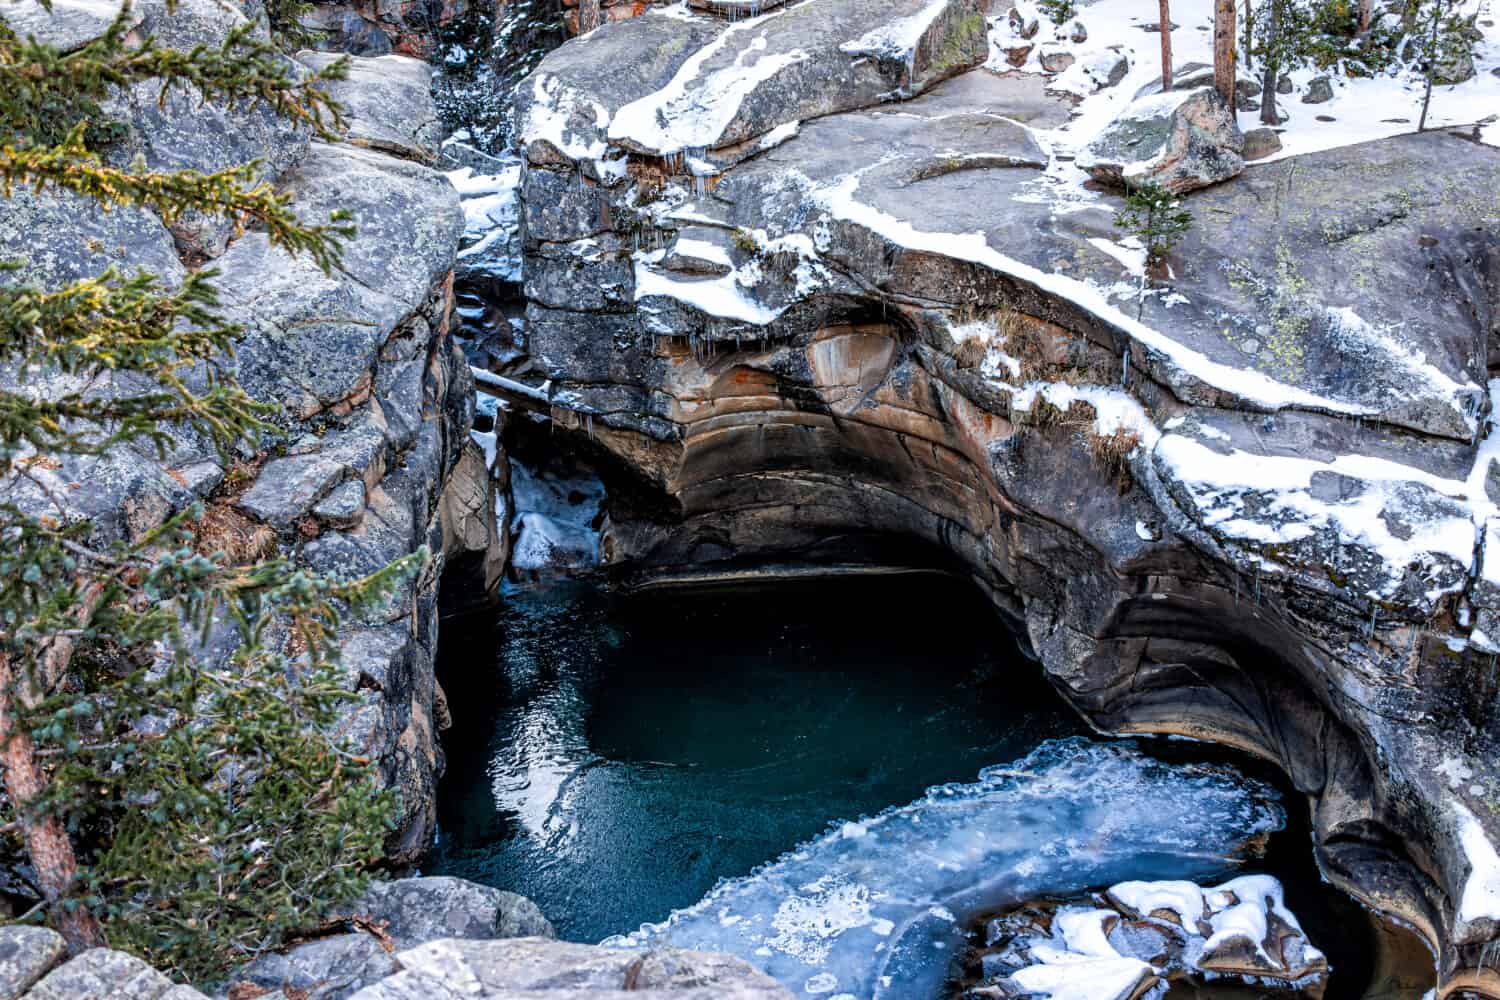 Independence Pass snow area rocky mountain closeup view of grottos cave pool near scenic byway in morning near Aspen, Colorado